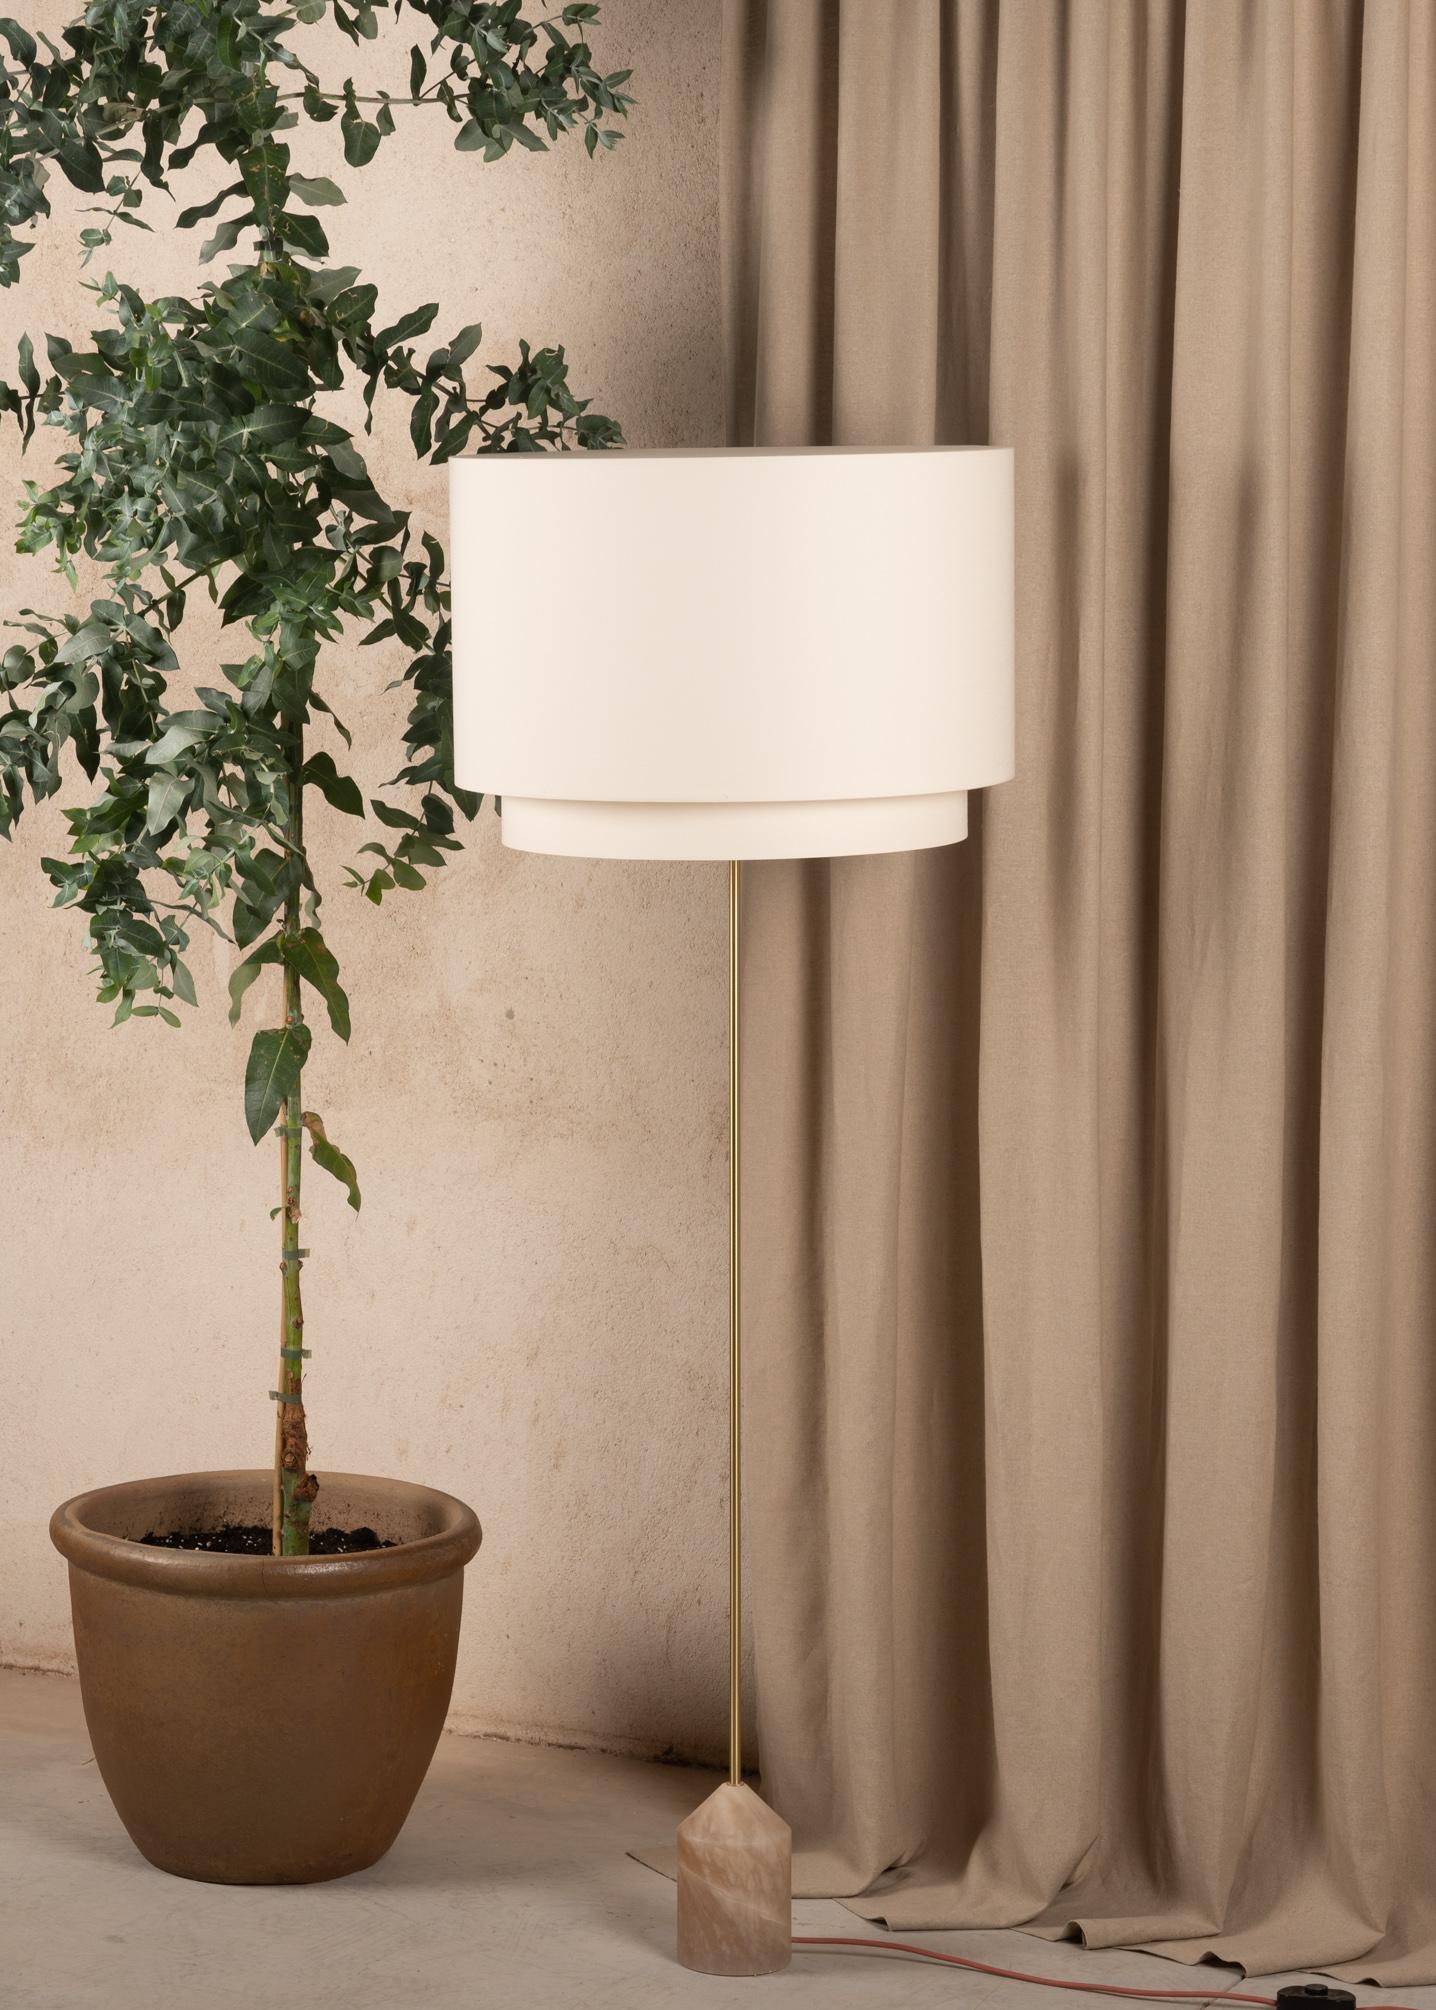 Baleto Duoblo White Alabaster Floor Lamp by Simone & Marcel
Dimensions: D 60 x W 60 x H 176 cm.
Materials: Brass, cotton and white alabaster.

Also available in different marble and alabaster options and finishes. Custom options available on